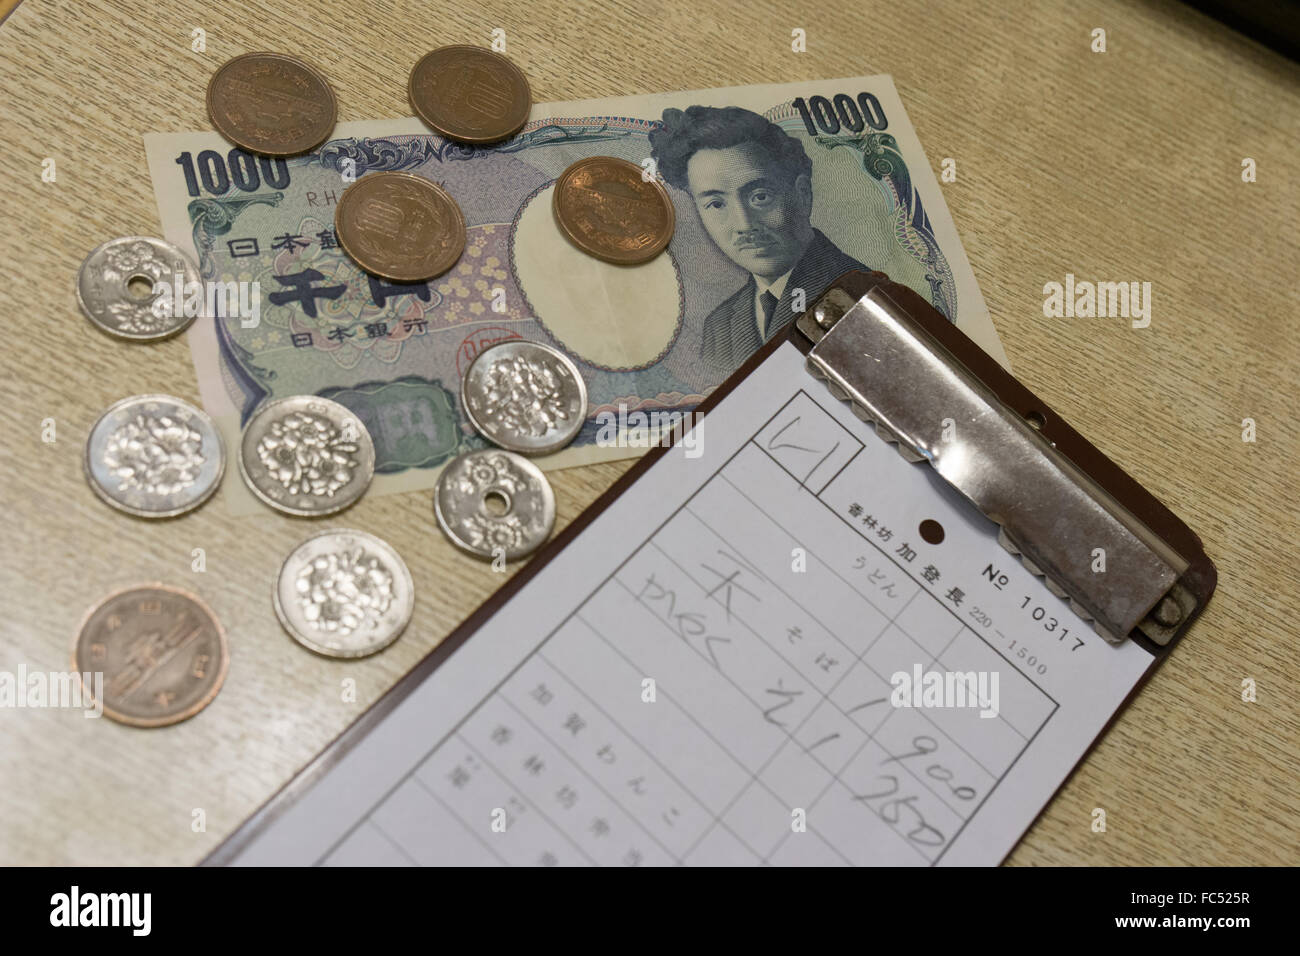 bill and payment in Japanese yen Stock Photo